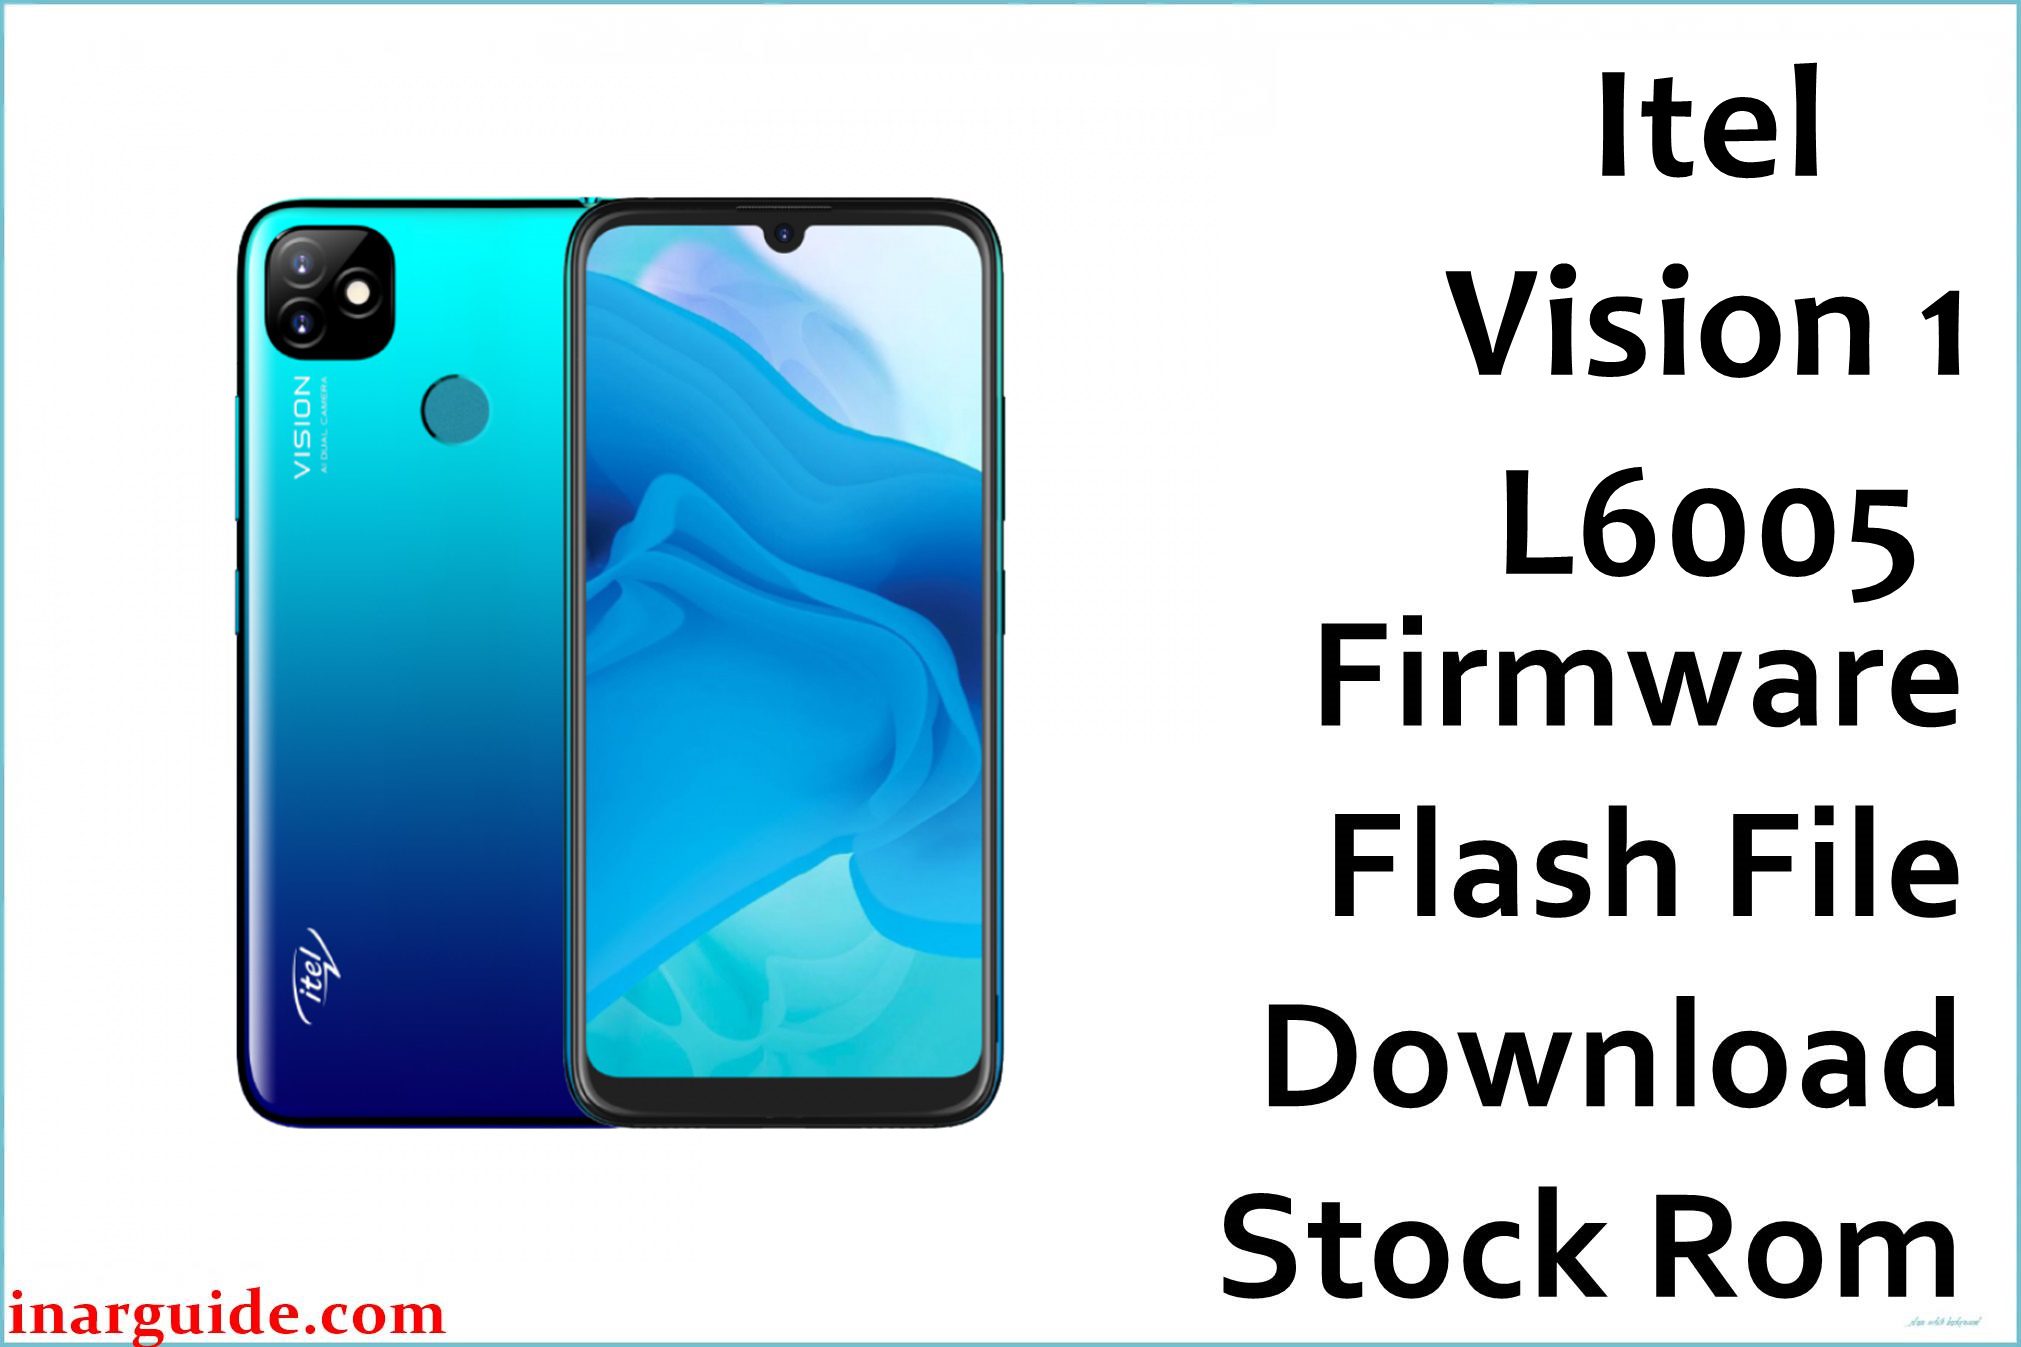 Itel Vision 1 L6005 Firmware Flash File Download [Stock Rom] - Inar Guide